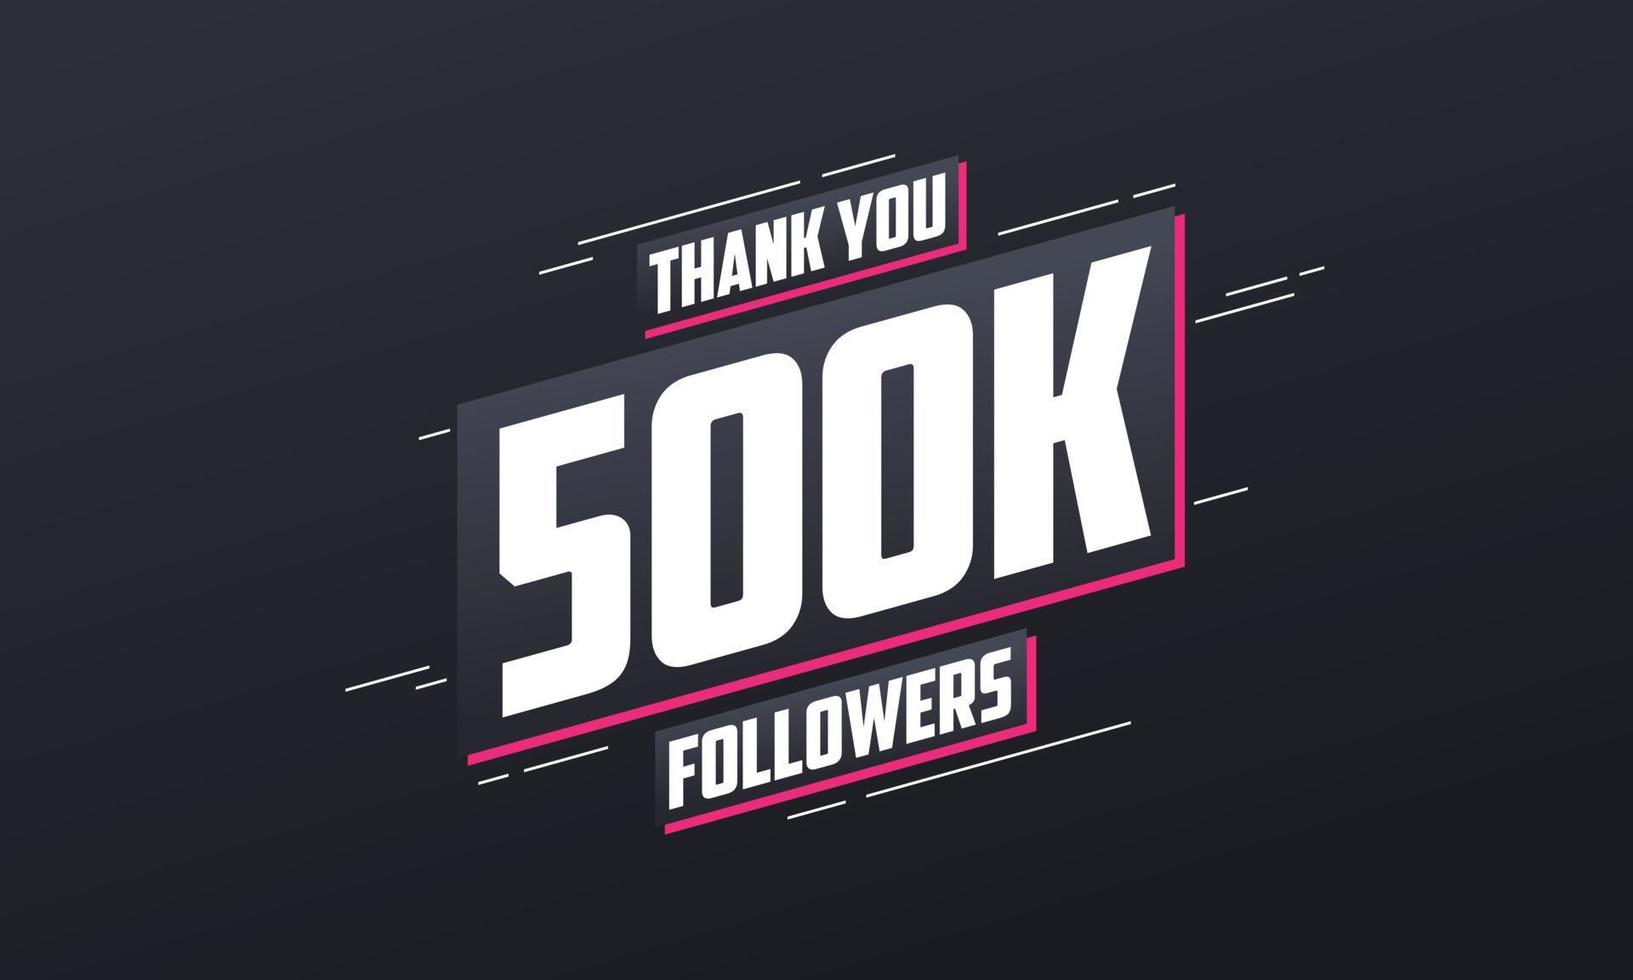 Thank you 500K followers, Greeting card template for social networks. vector